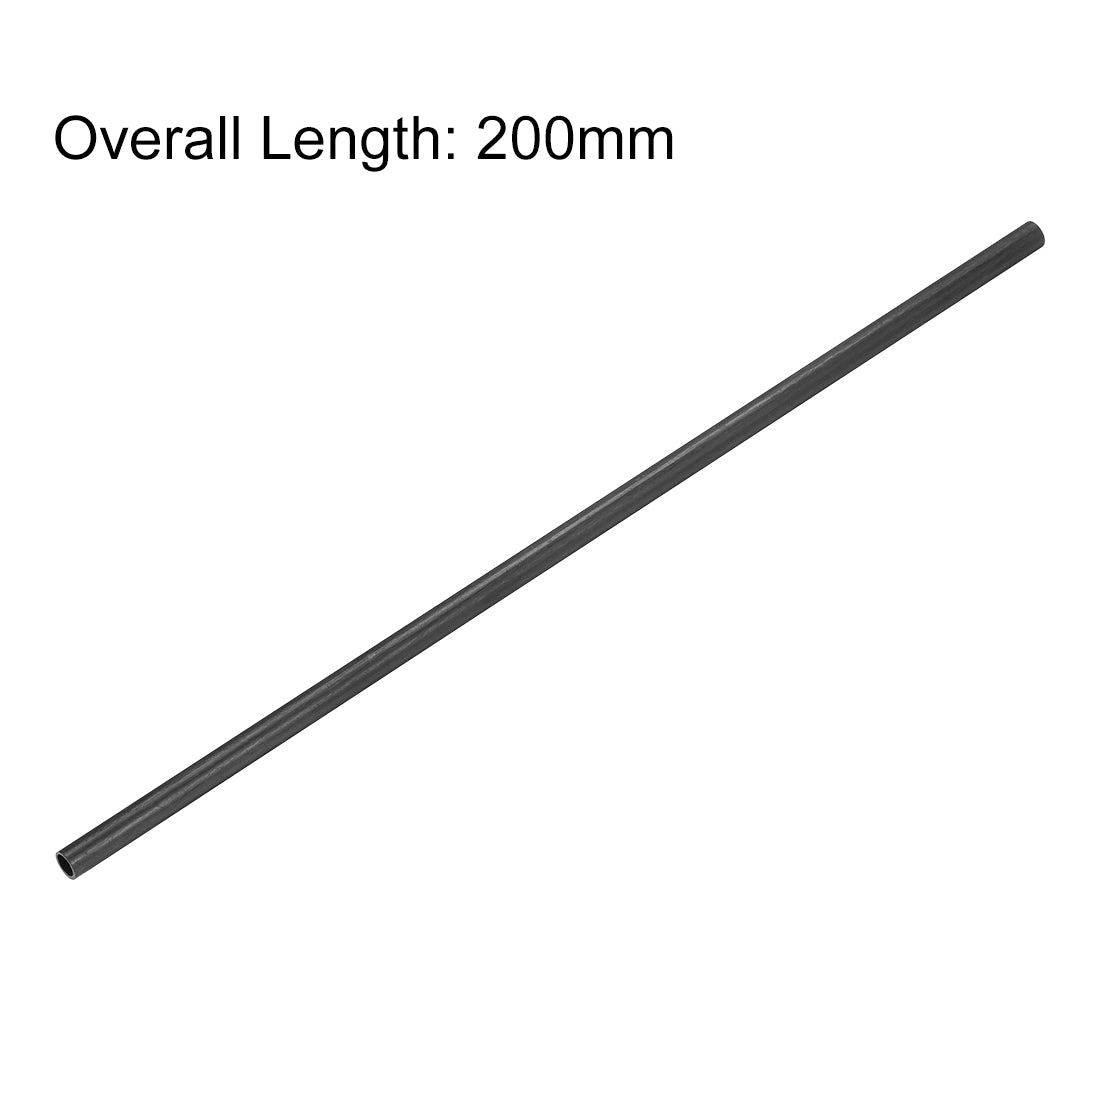 uxcell Uxcell Carbon Fiber Round Tube 5mm x 4mm x 200mm Carbon Fiber Wing Pultrusion Tubing for RC Airplane Quadcopter 1 Pcs